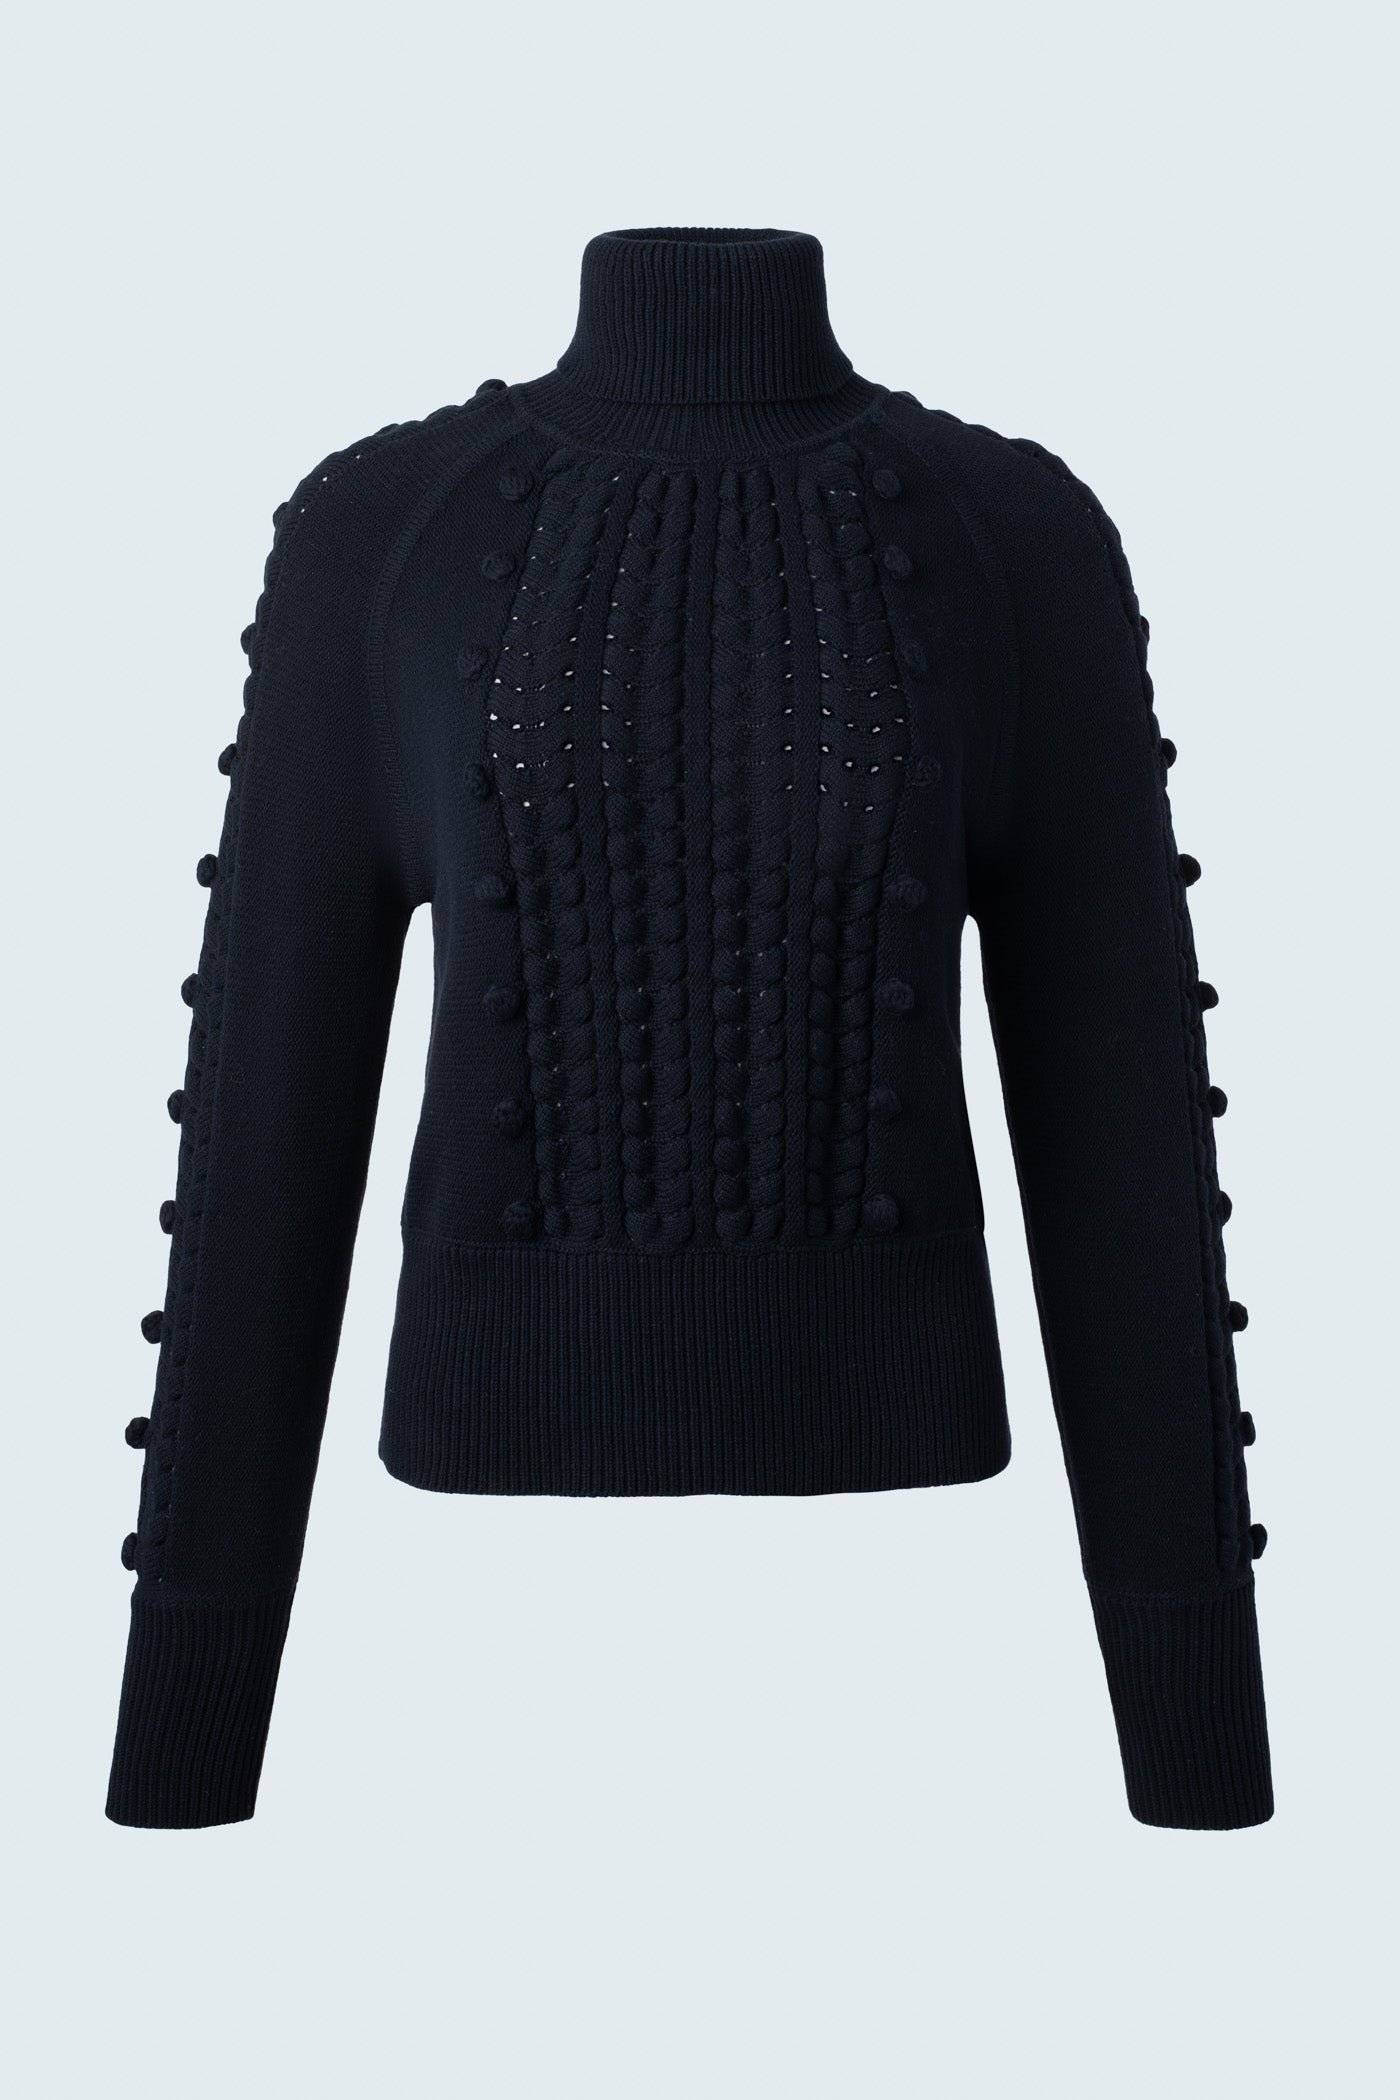 Multi Textured Long Sleeve Sweater in Navy